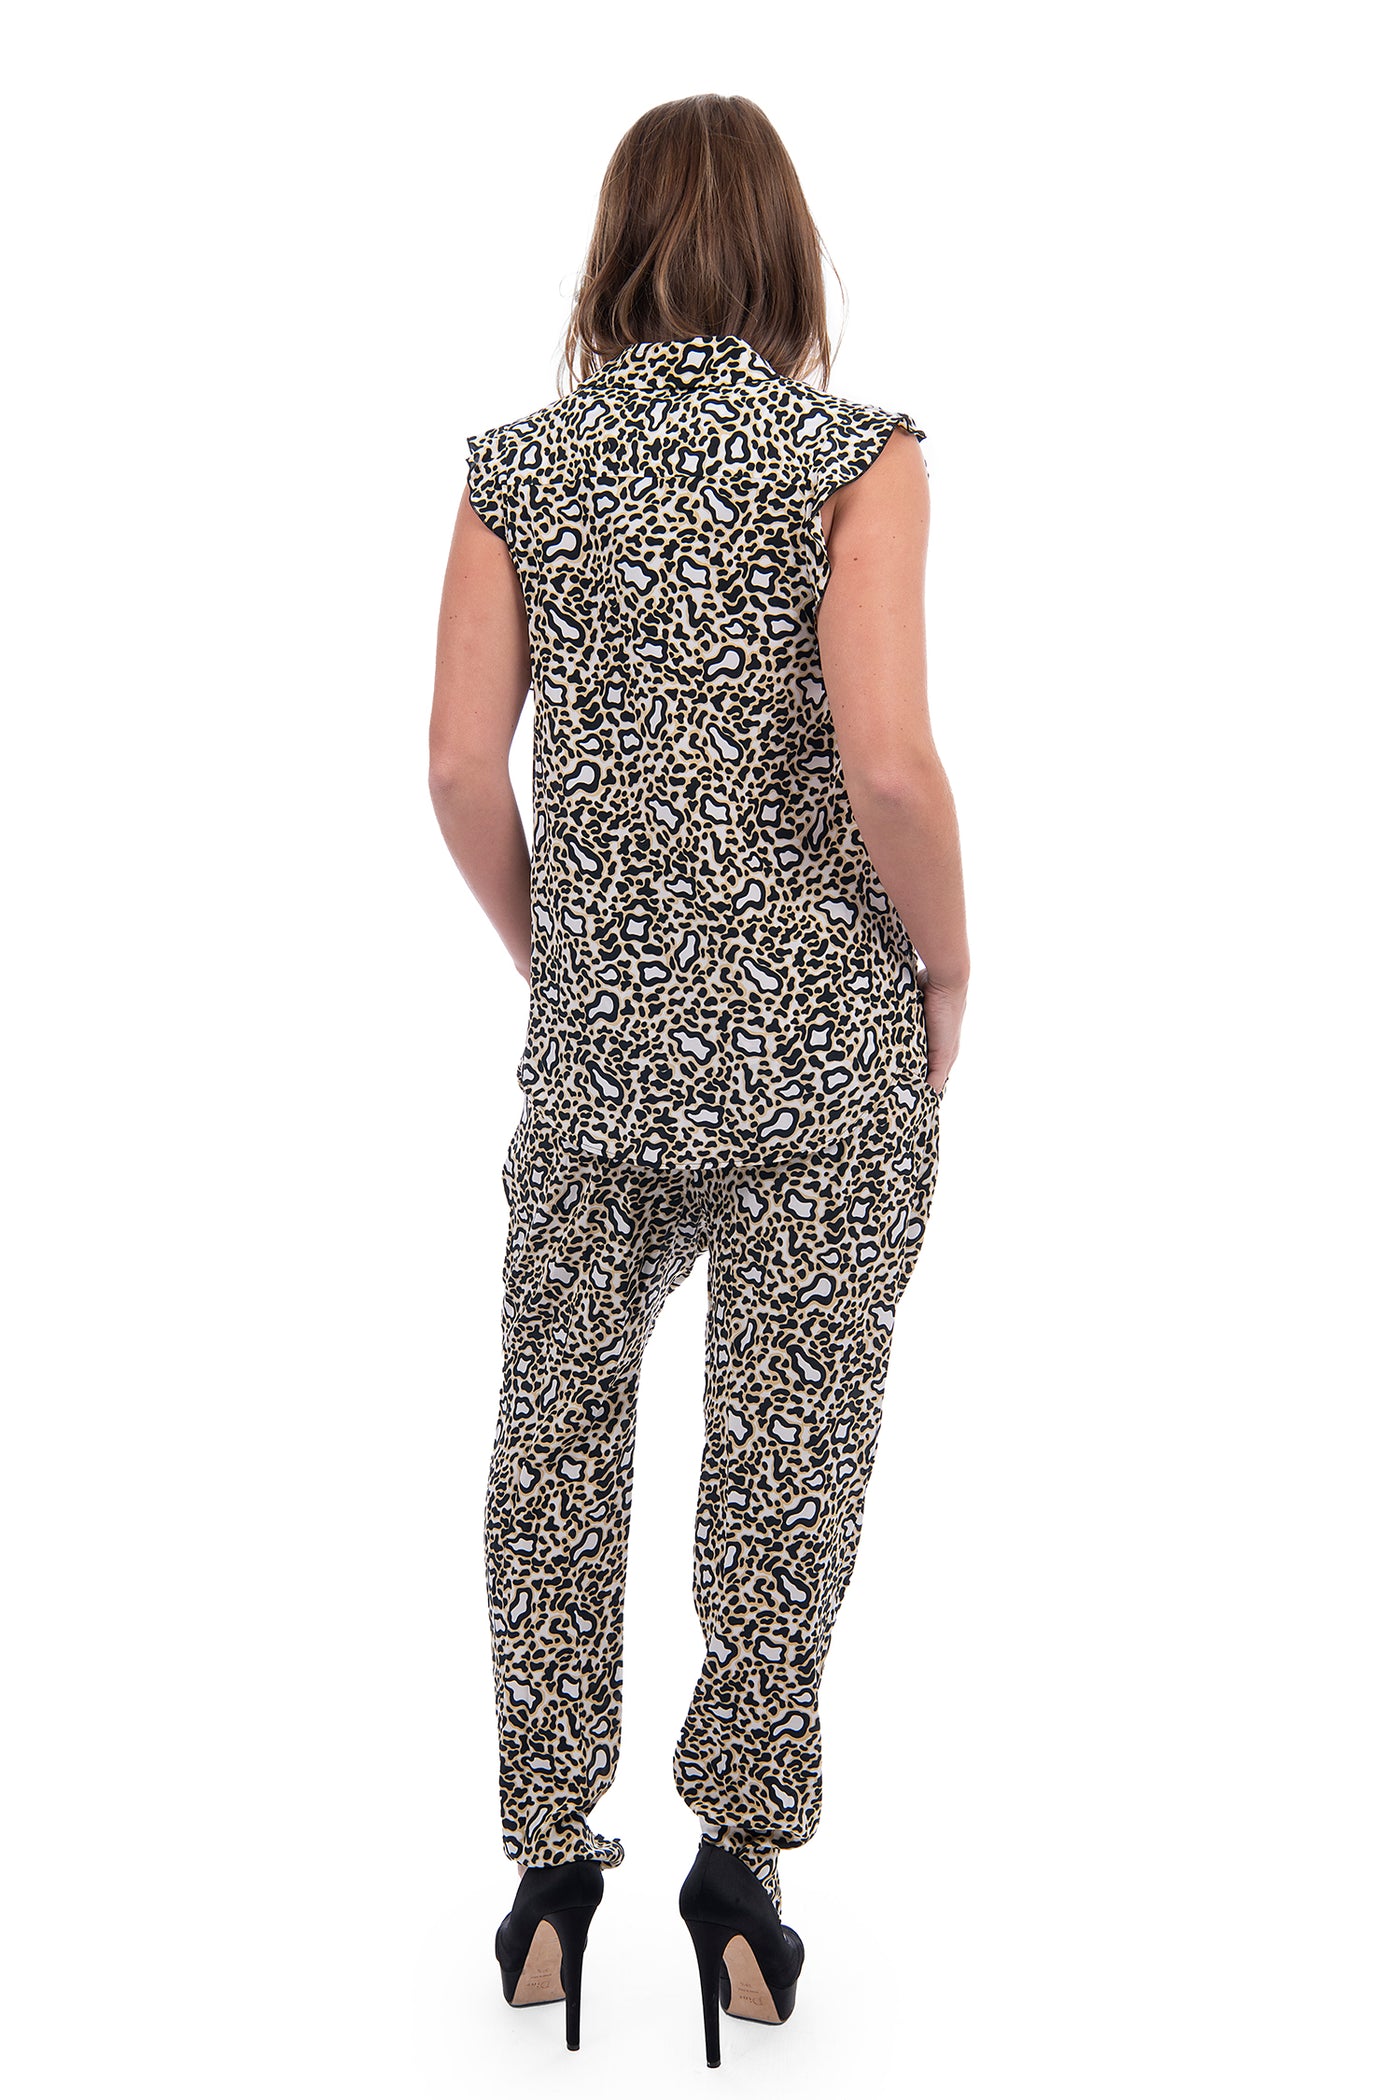 Stella Mccartney leopard print blouse and trousers